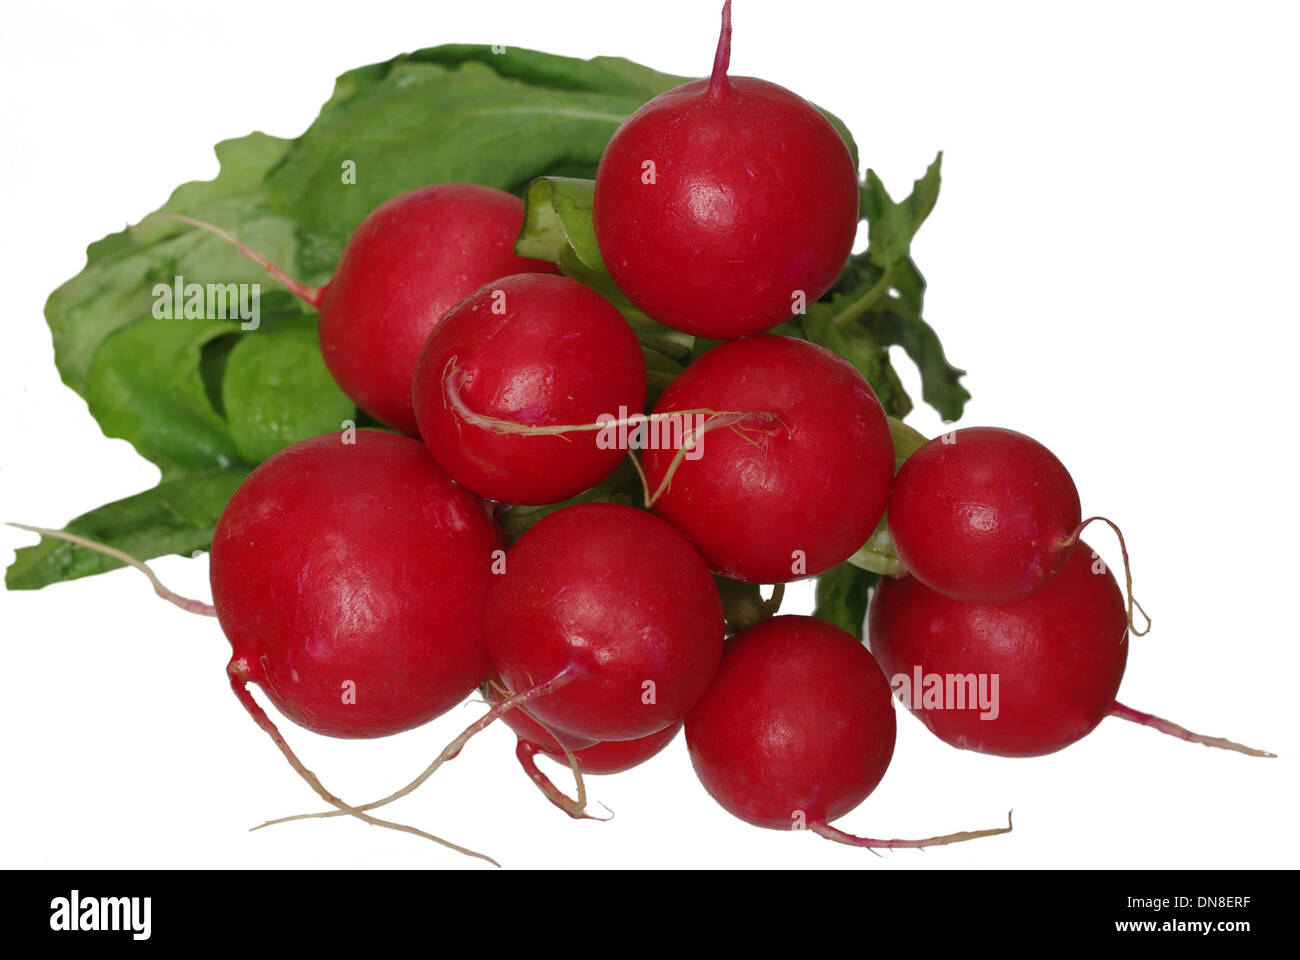 radish from green leaves on white background Stock Photo